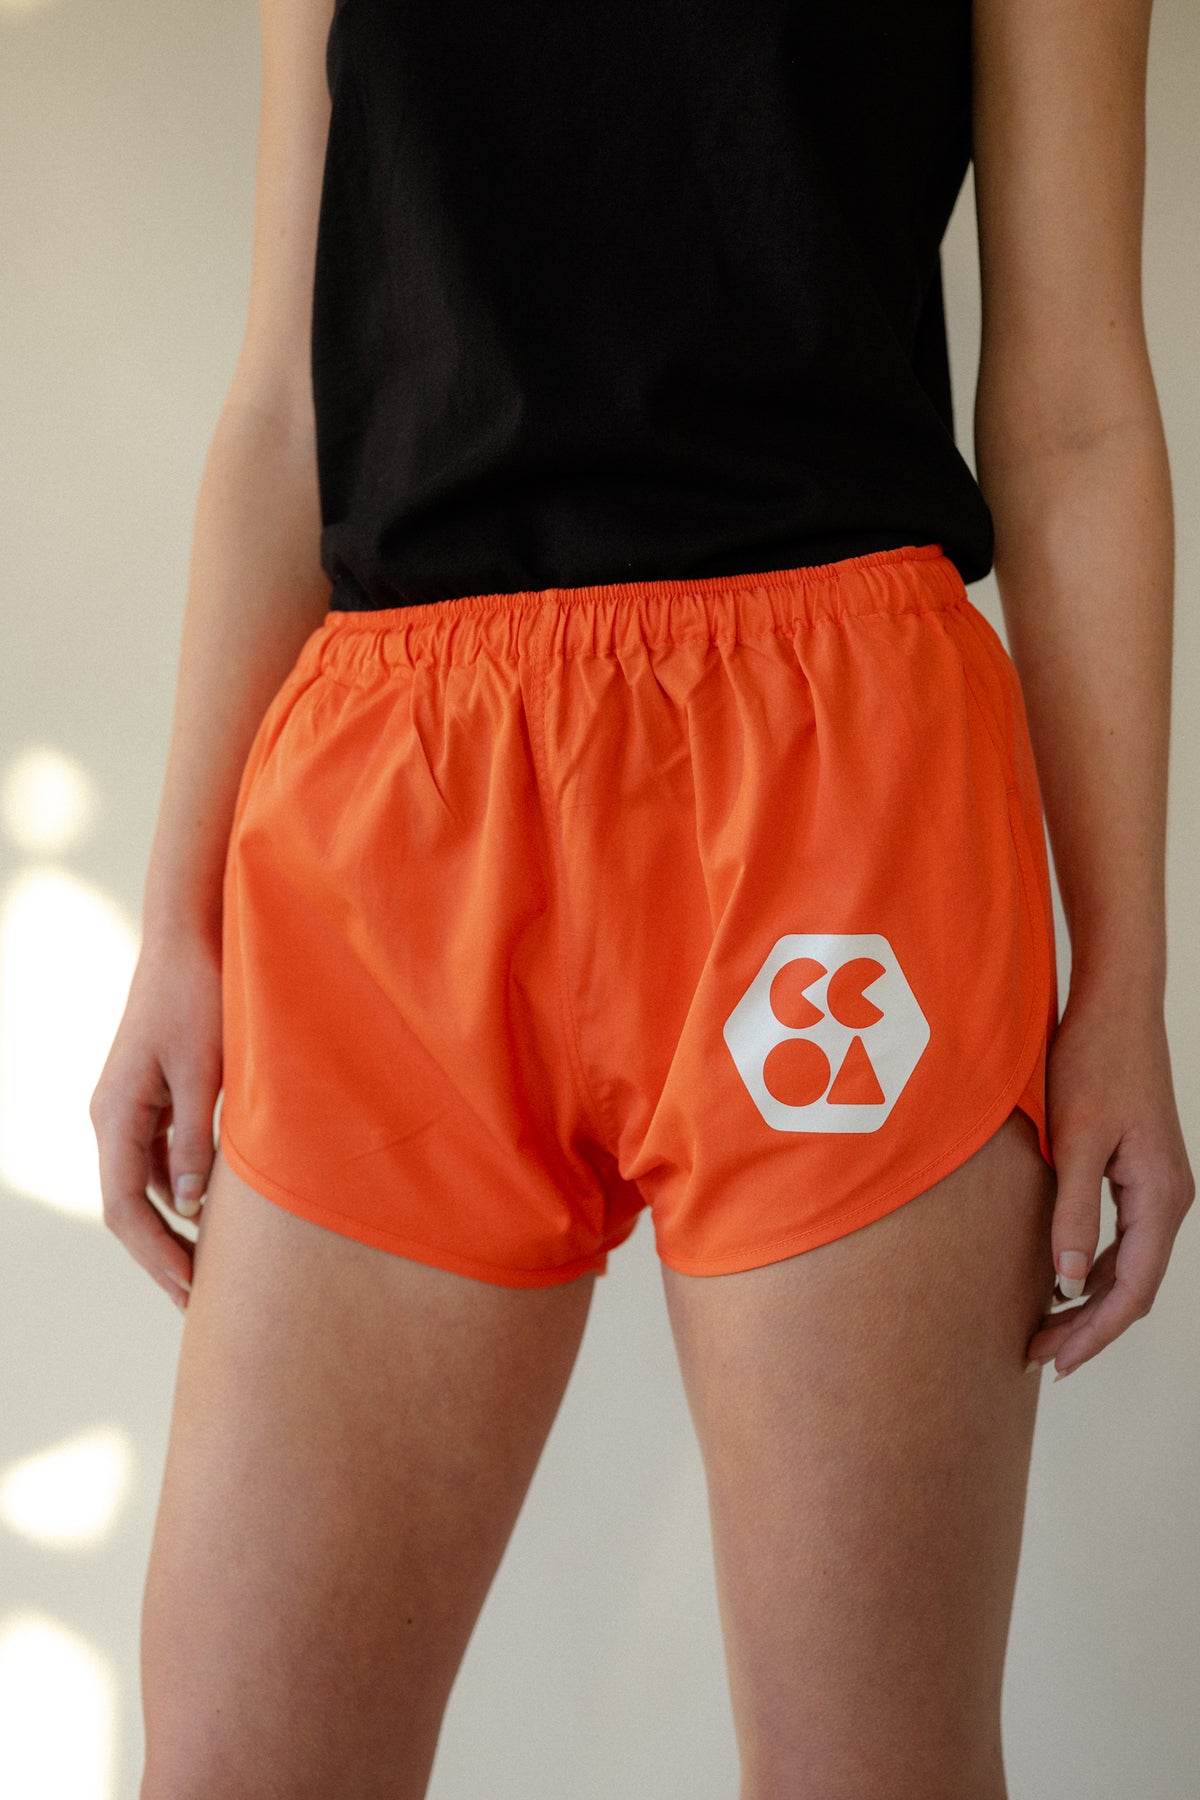 
            Image showing shoulder to knee of white female wearing lightweight running short plastic free in flame red, with white CCOA logo. Shorts have elasticated waist.  